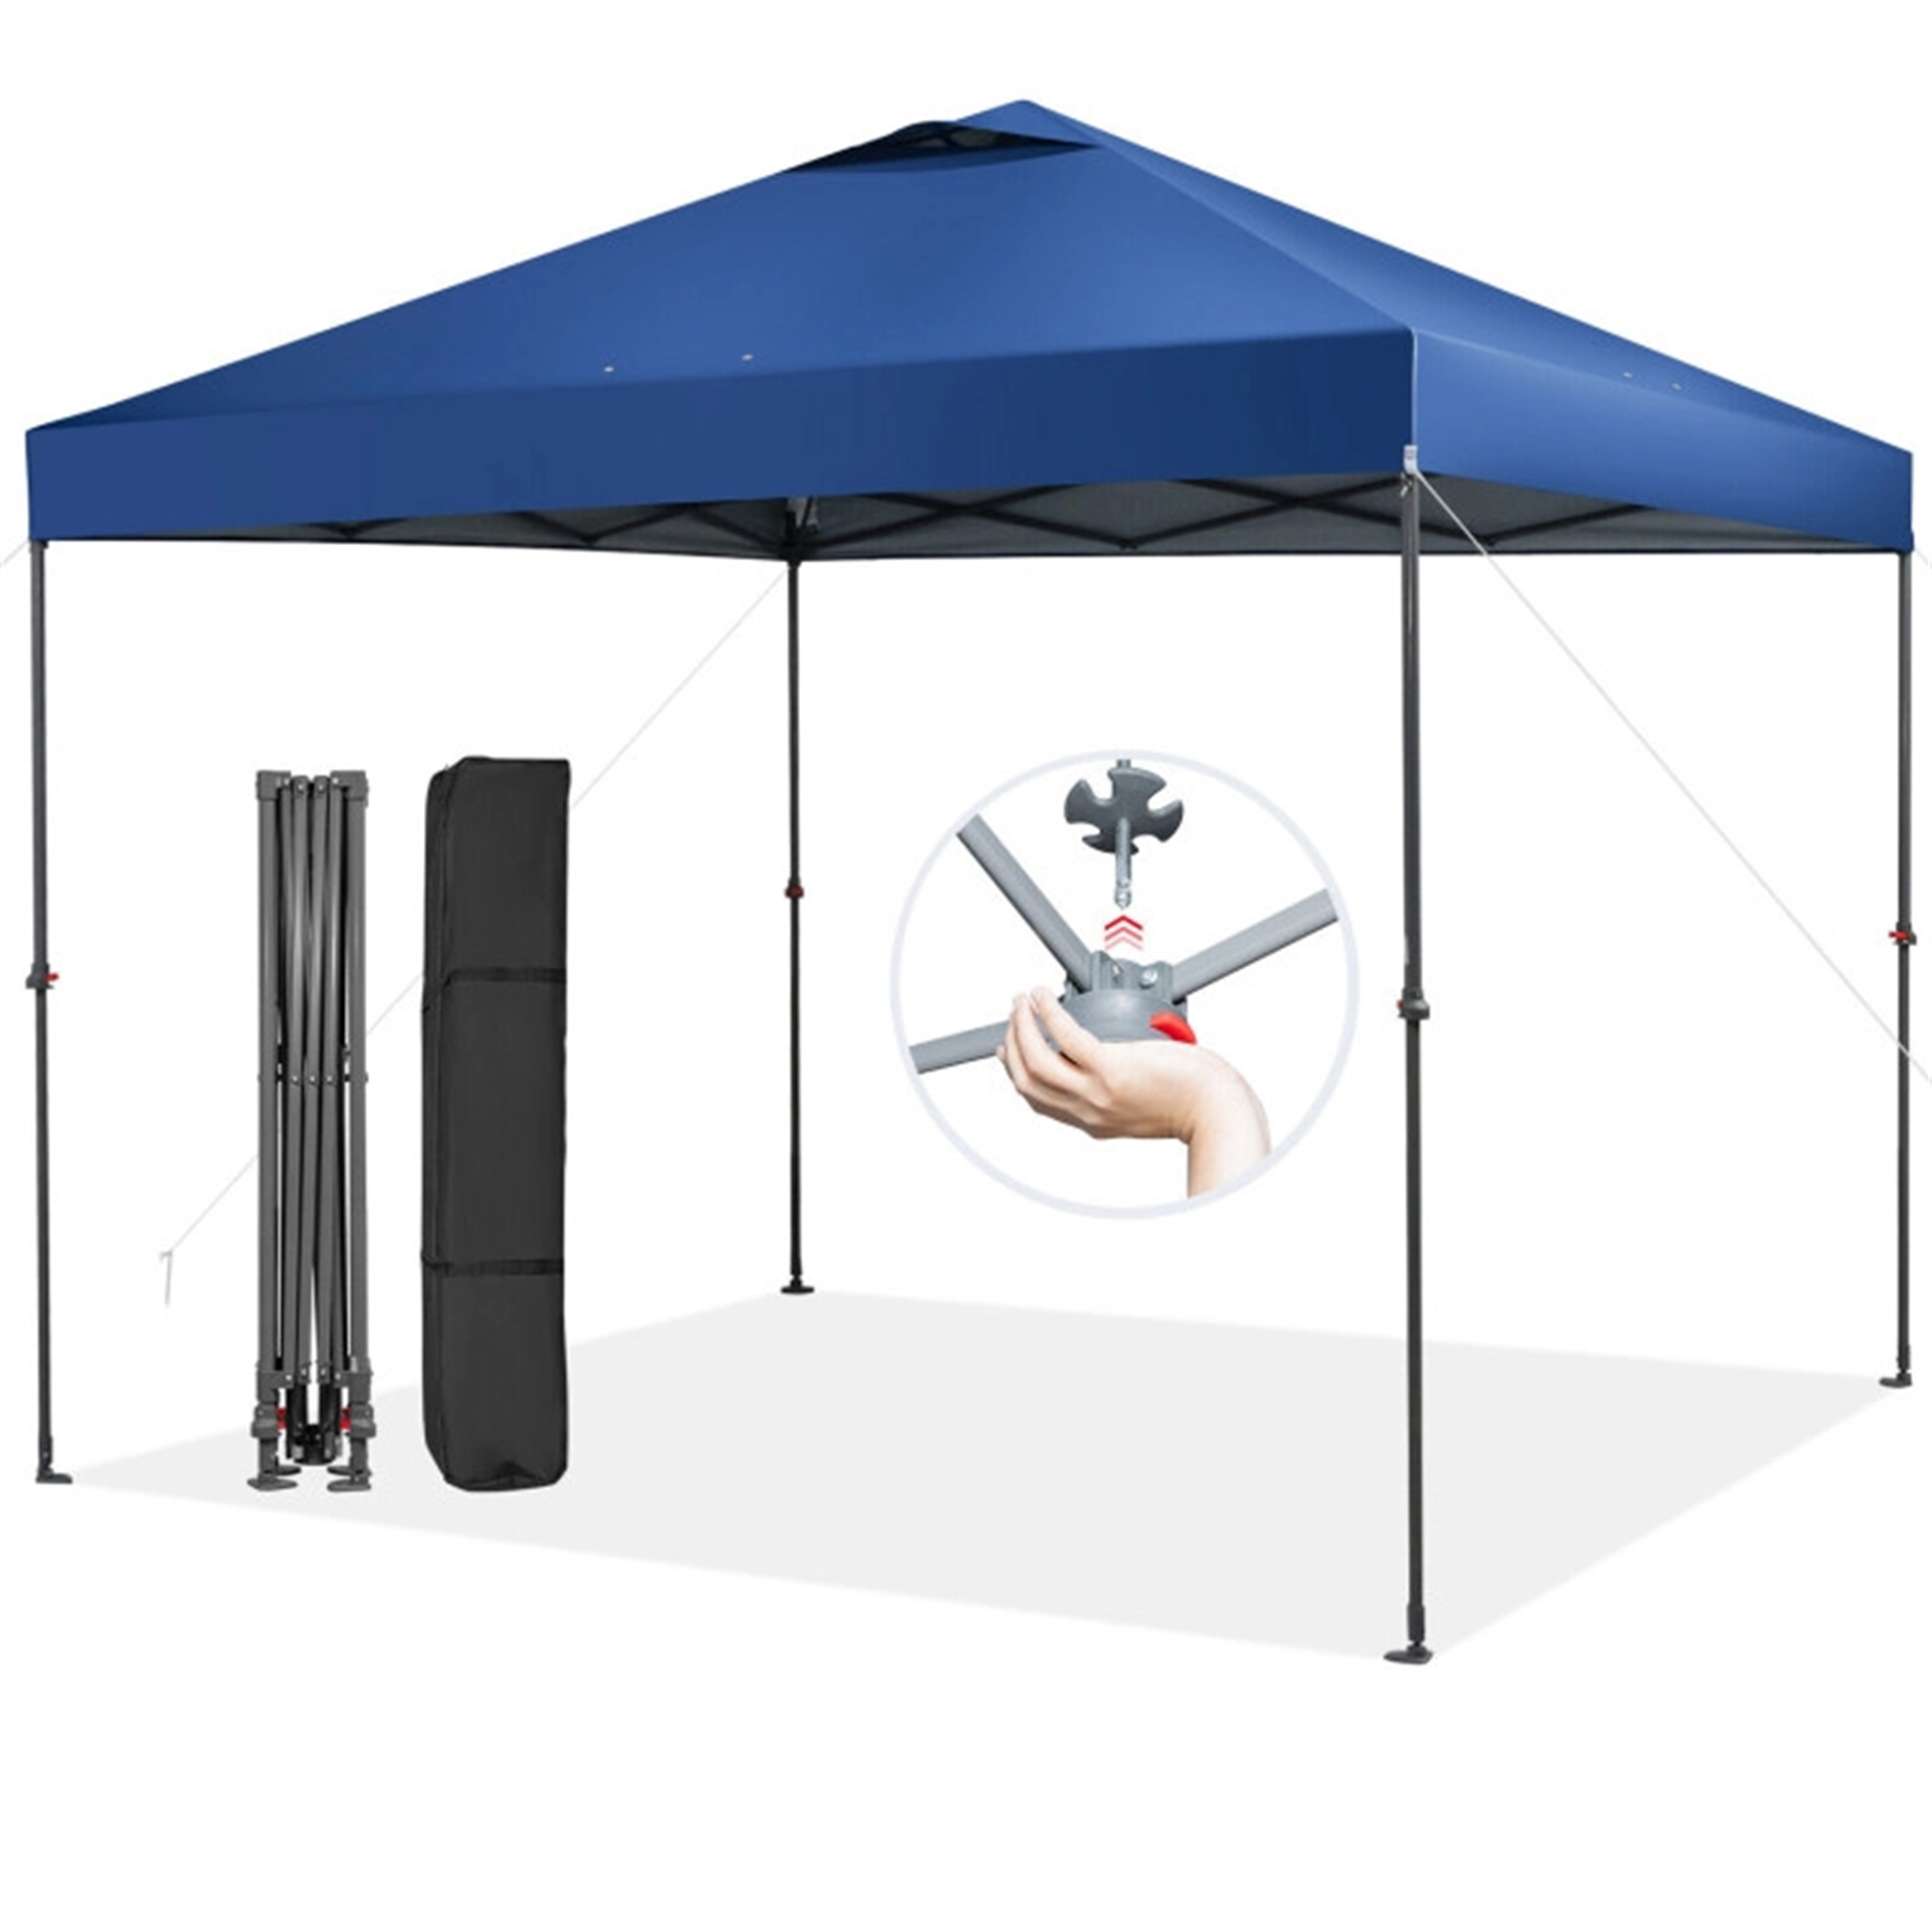 10 x 10 Feet Foldable Outdoor Instant Pop-up Canopy with Carry Bag